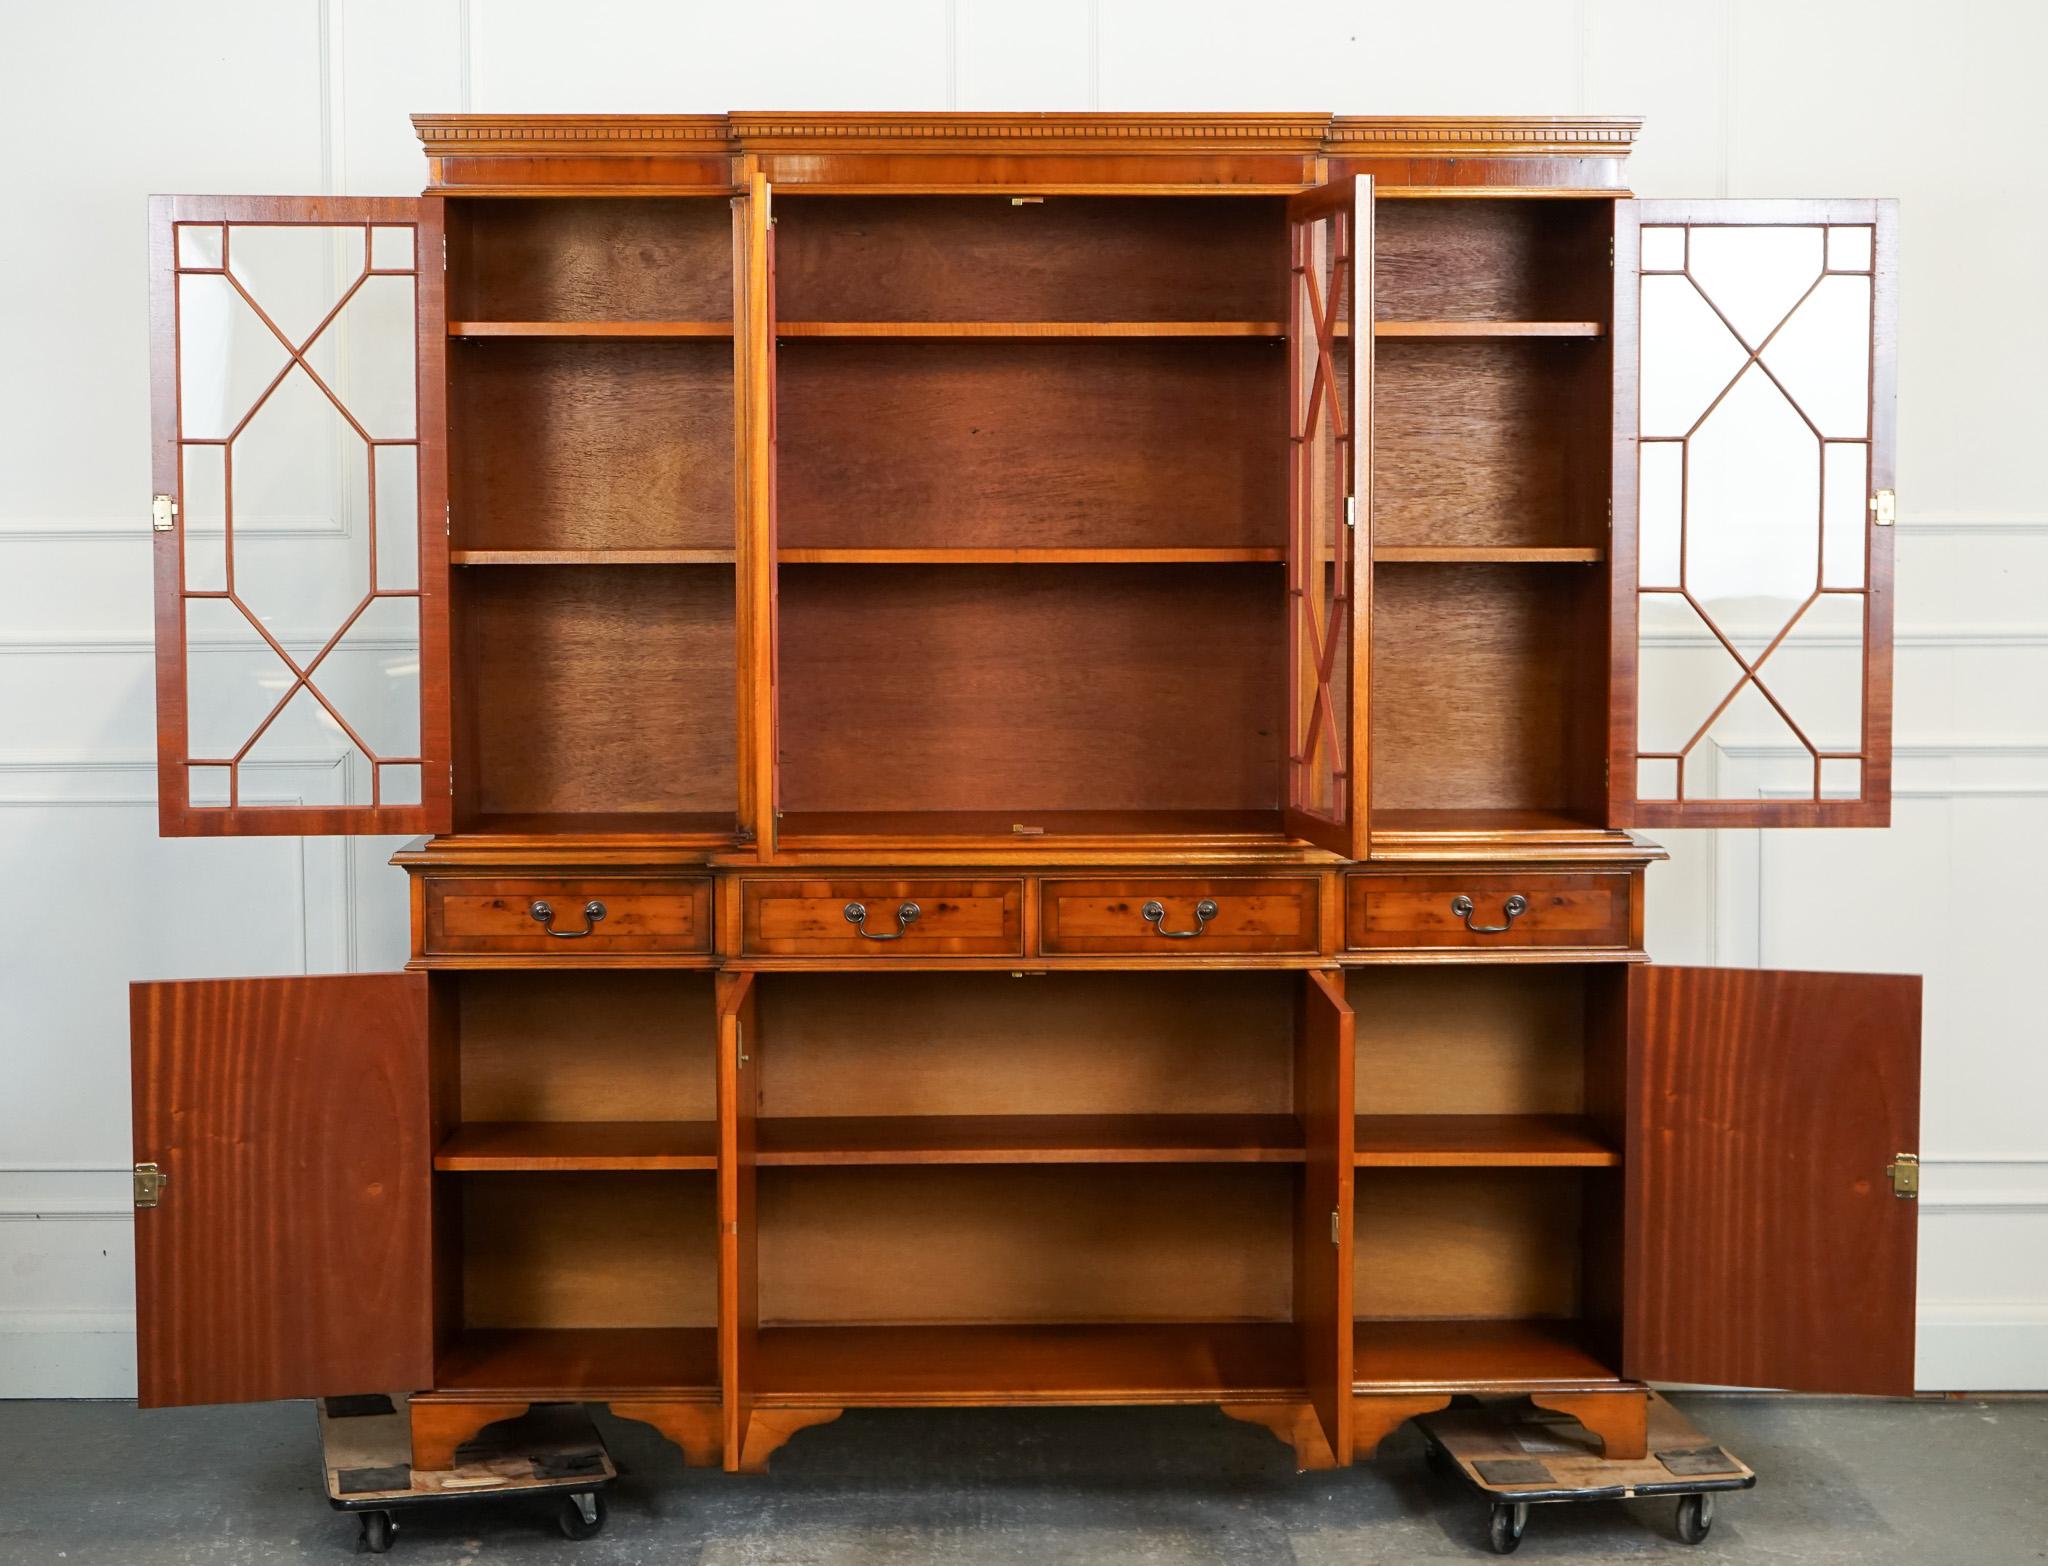 Yew STUNNING VINTAGE BURR YEW WOOD DISPLAY CABiNET BOOKCASE BY CHARLES BARR J1 For Sale